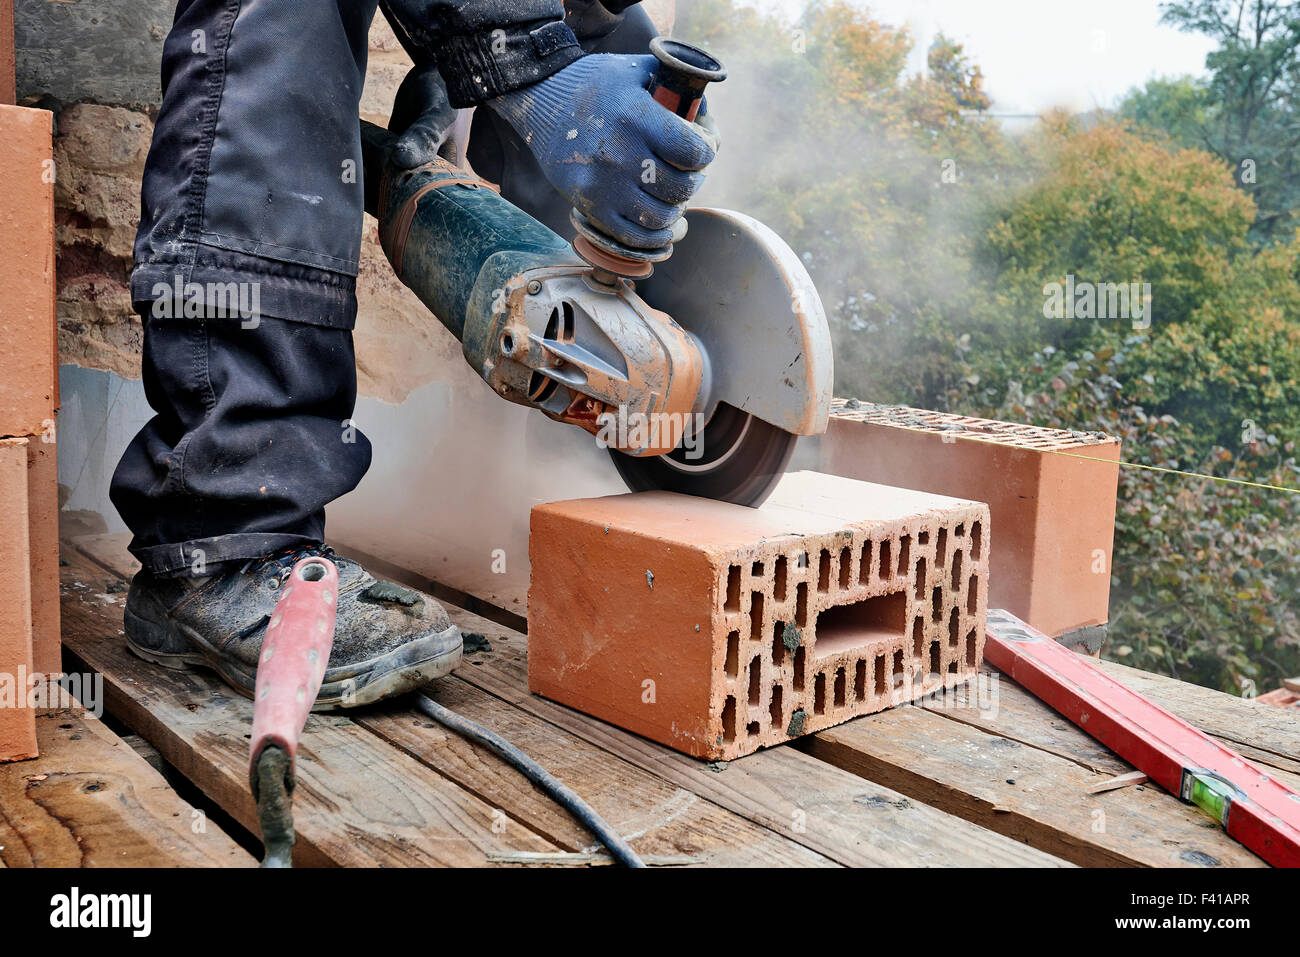 Construction worker using masonry saw to cut concrete blocks to build